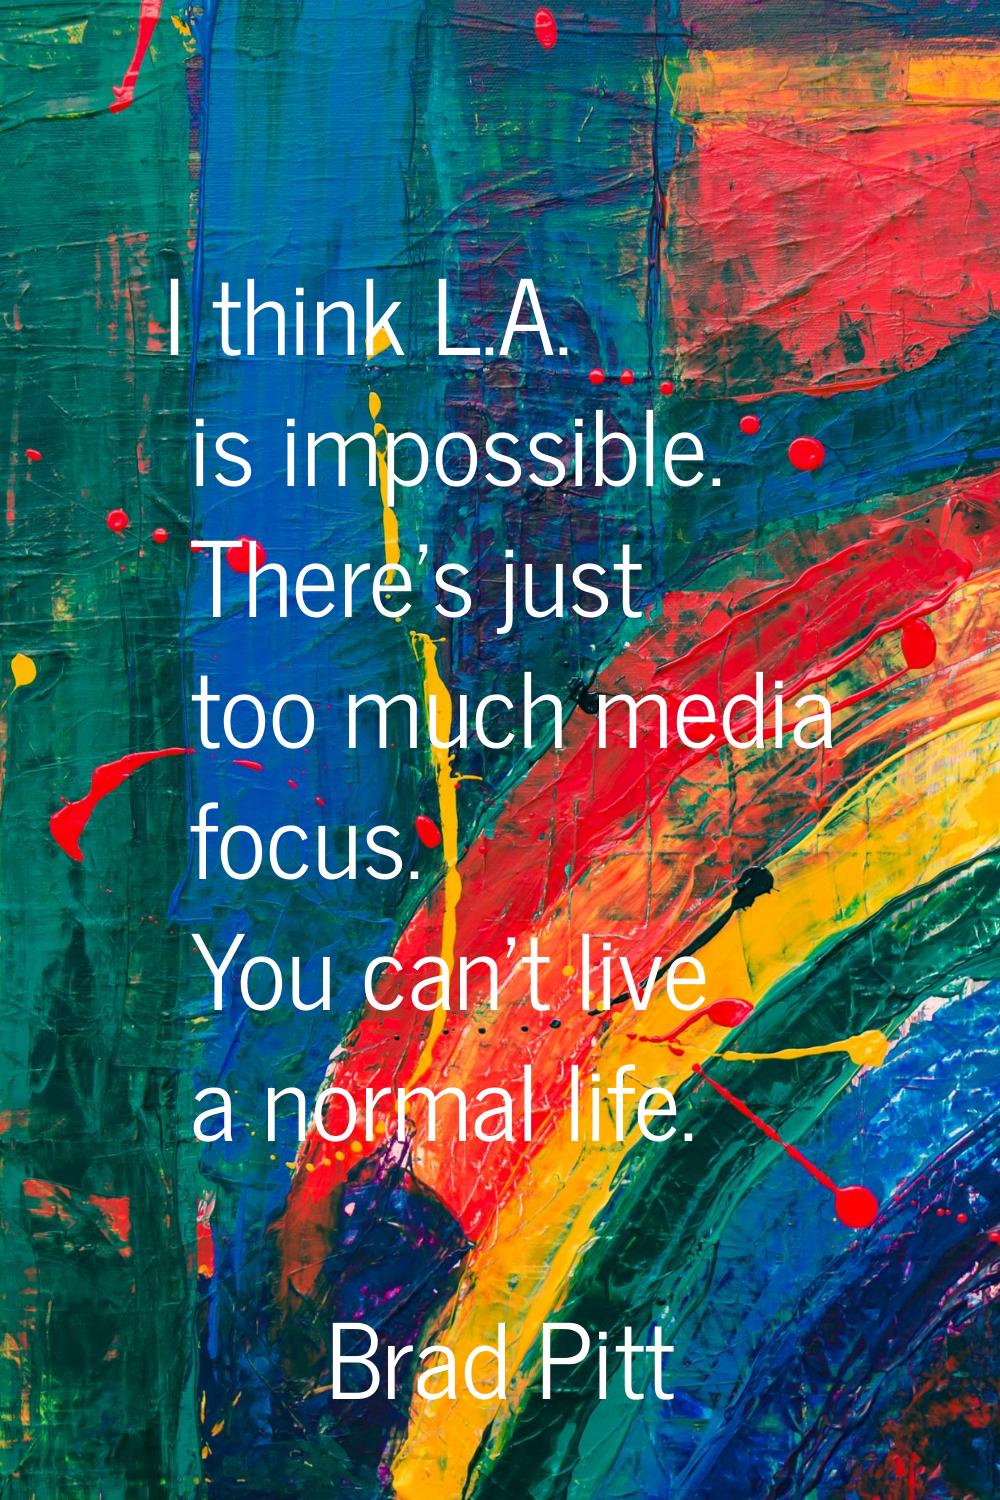 I think L.A. is impossible. There's just too much media focus. You can't live a normal life.